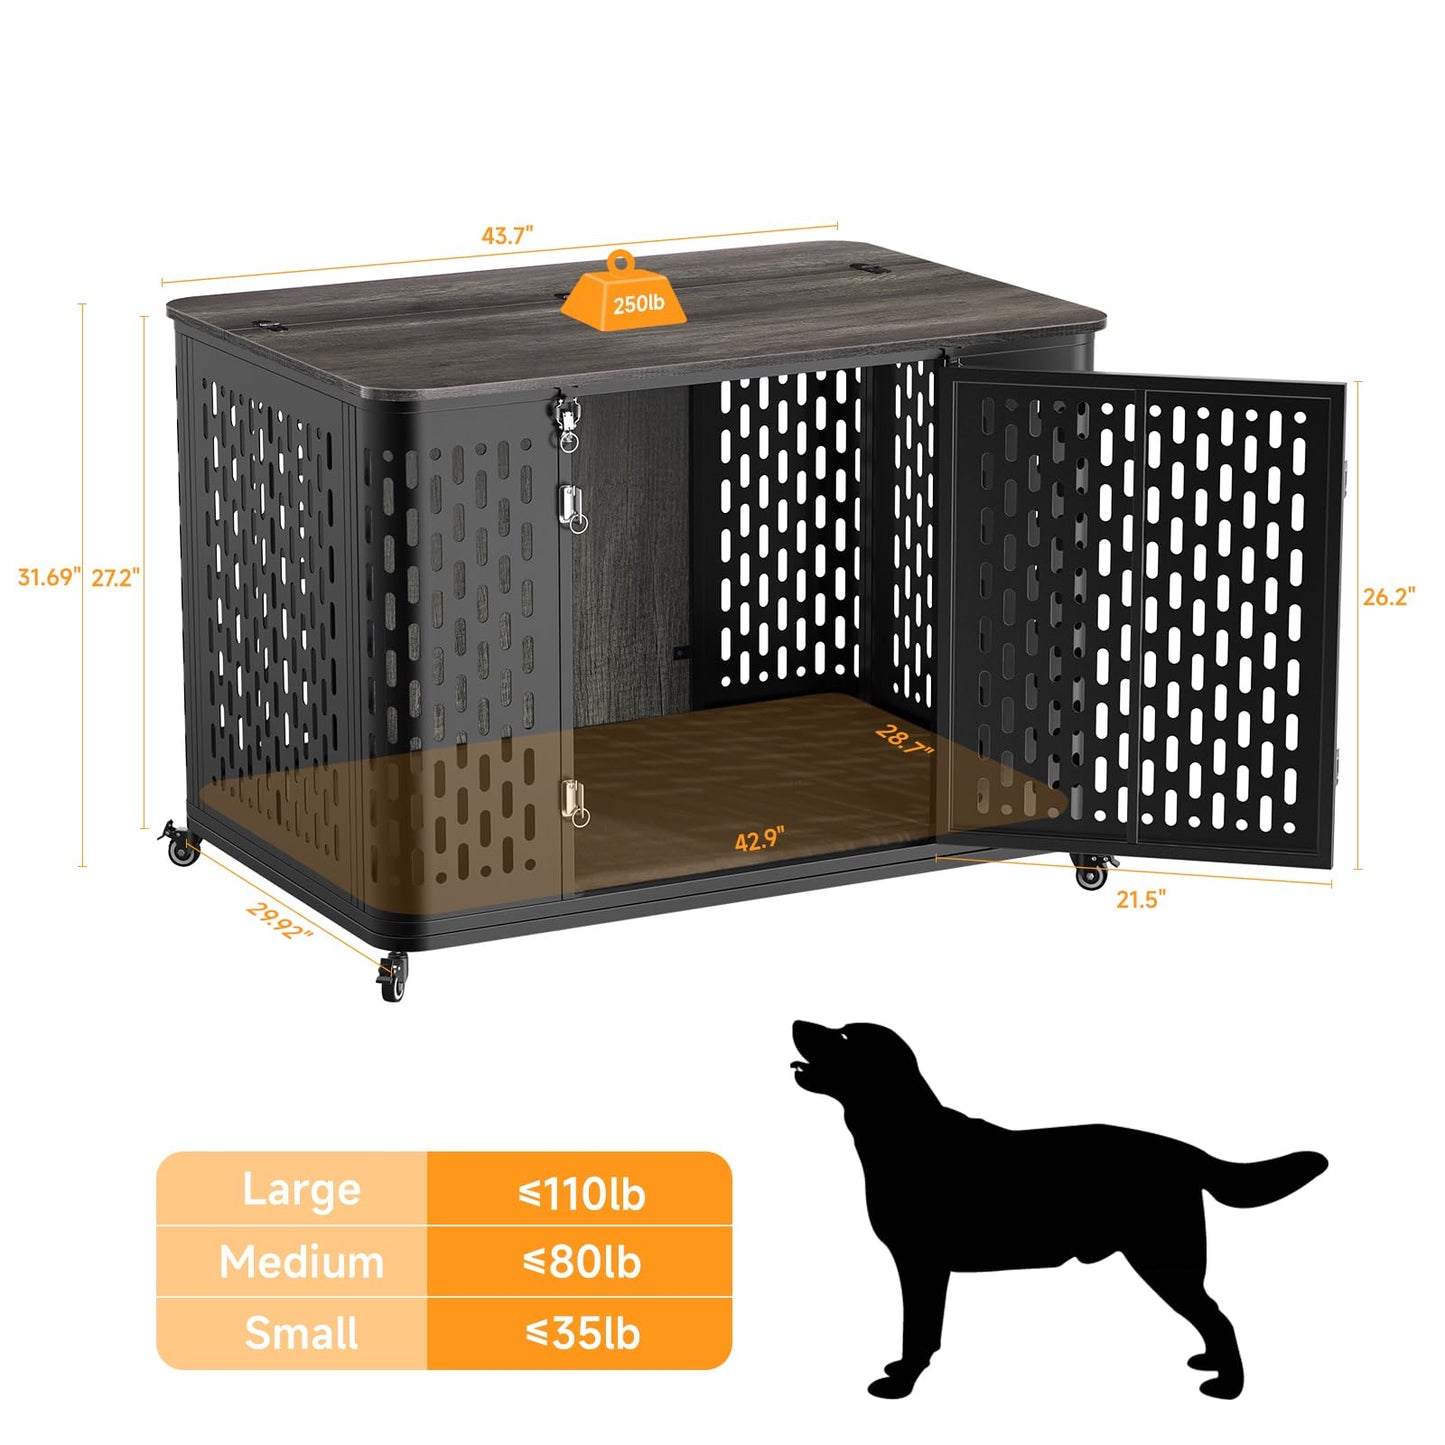 ONBRILL Dog Crate Furniture with Cushion, Wood Dog Kennel with Flexible Wheels and Multi-Purpose Dog Cage for Small/Medium/Large Dogs, 43.7 Inch Dog Kennel, Rustic Grey